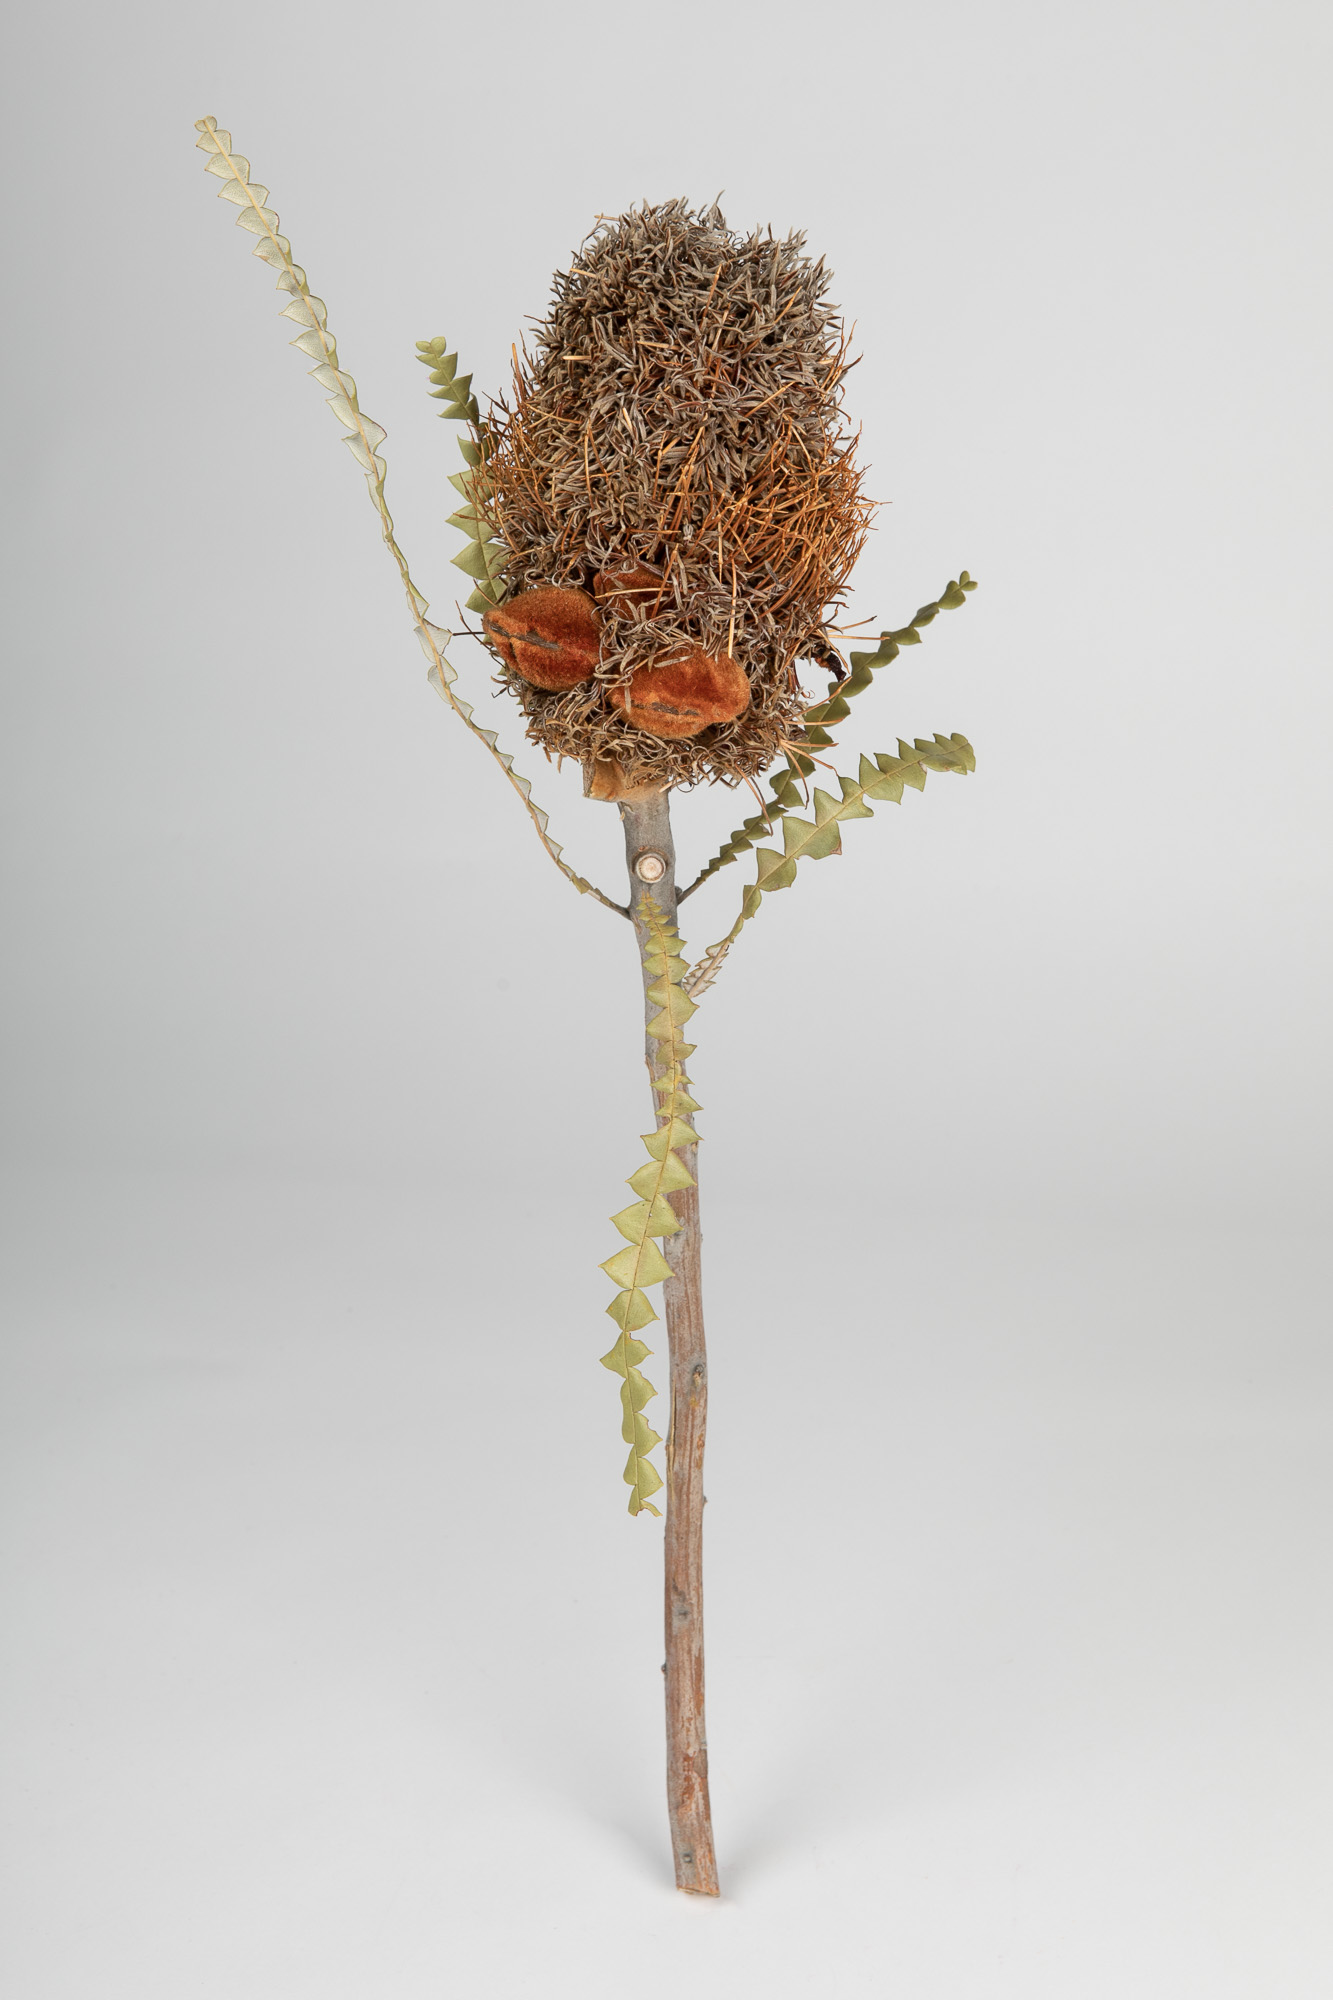 Banksia Speciosa Cones Tinted Apricot – WAFEX